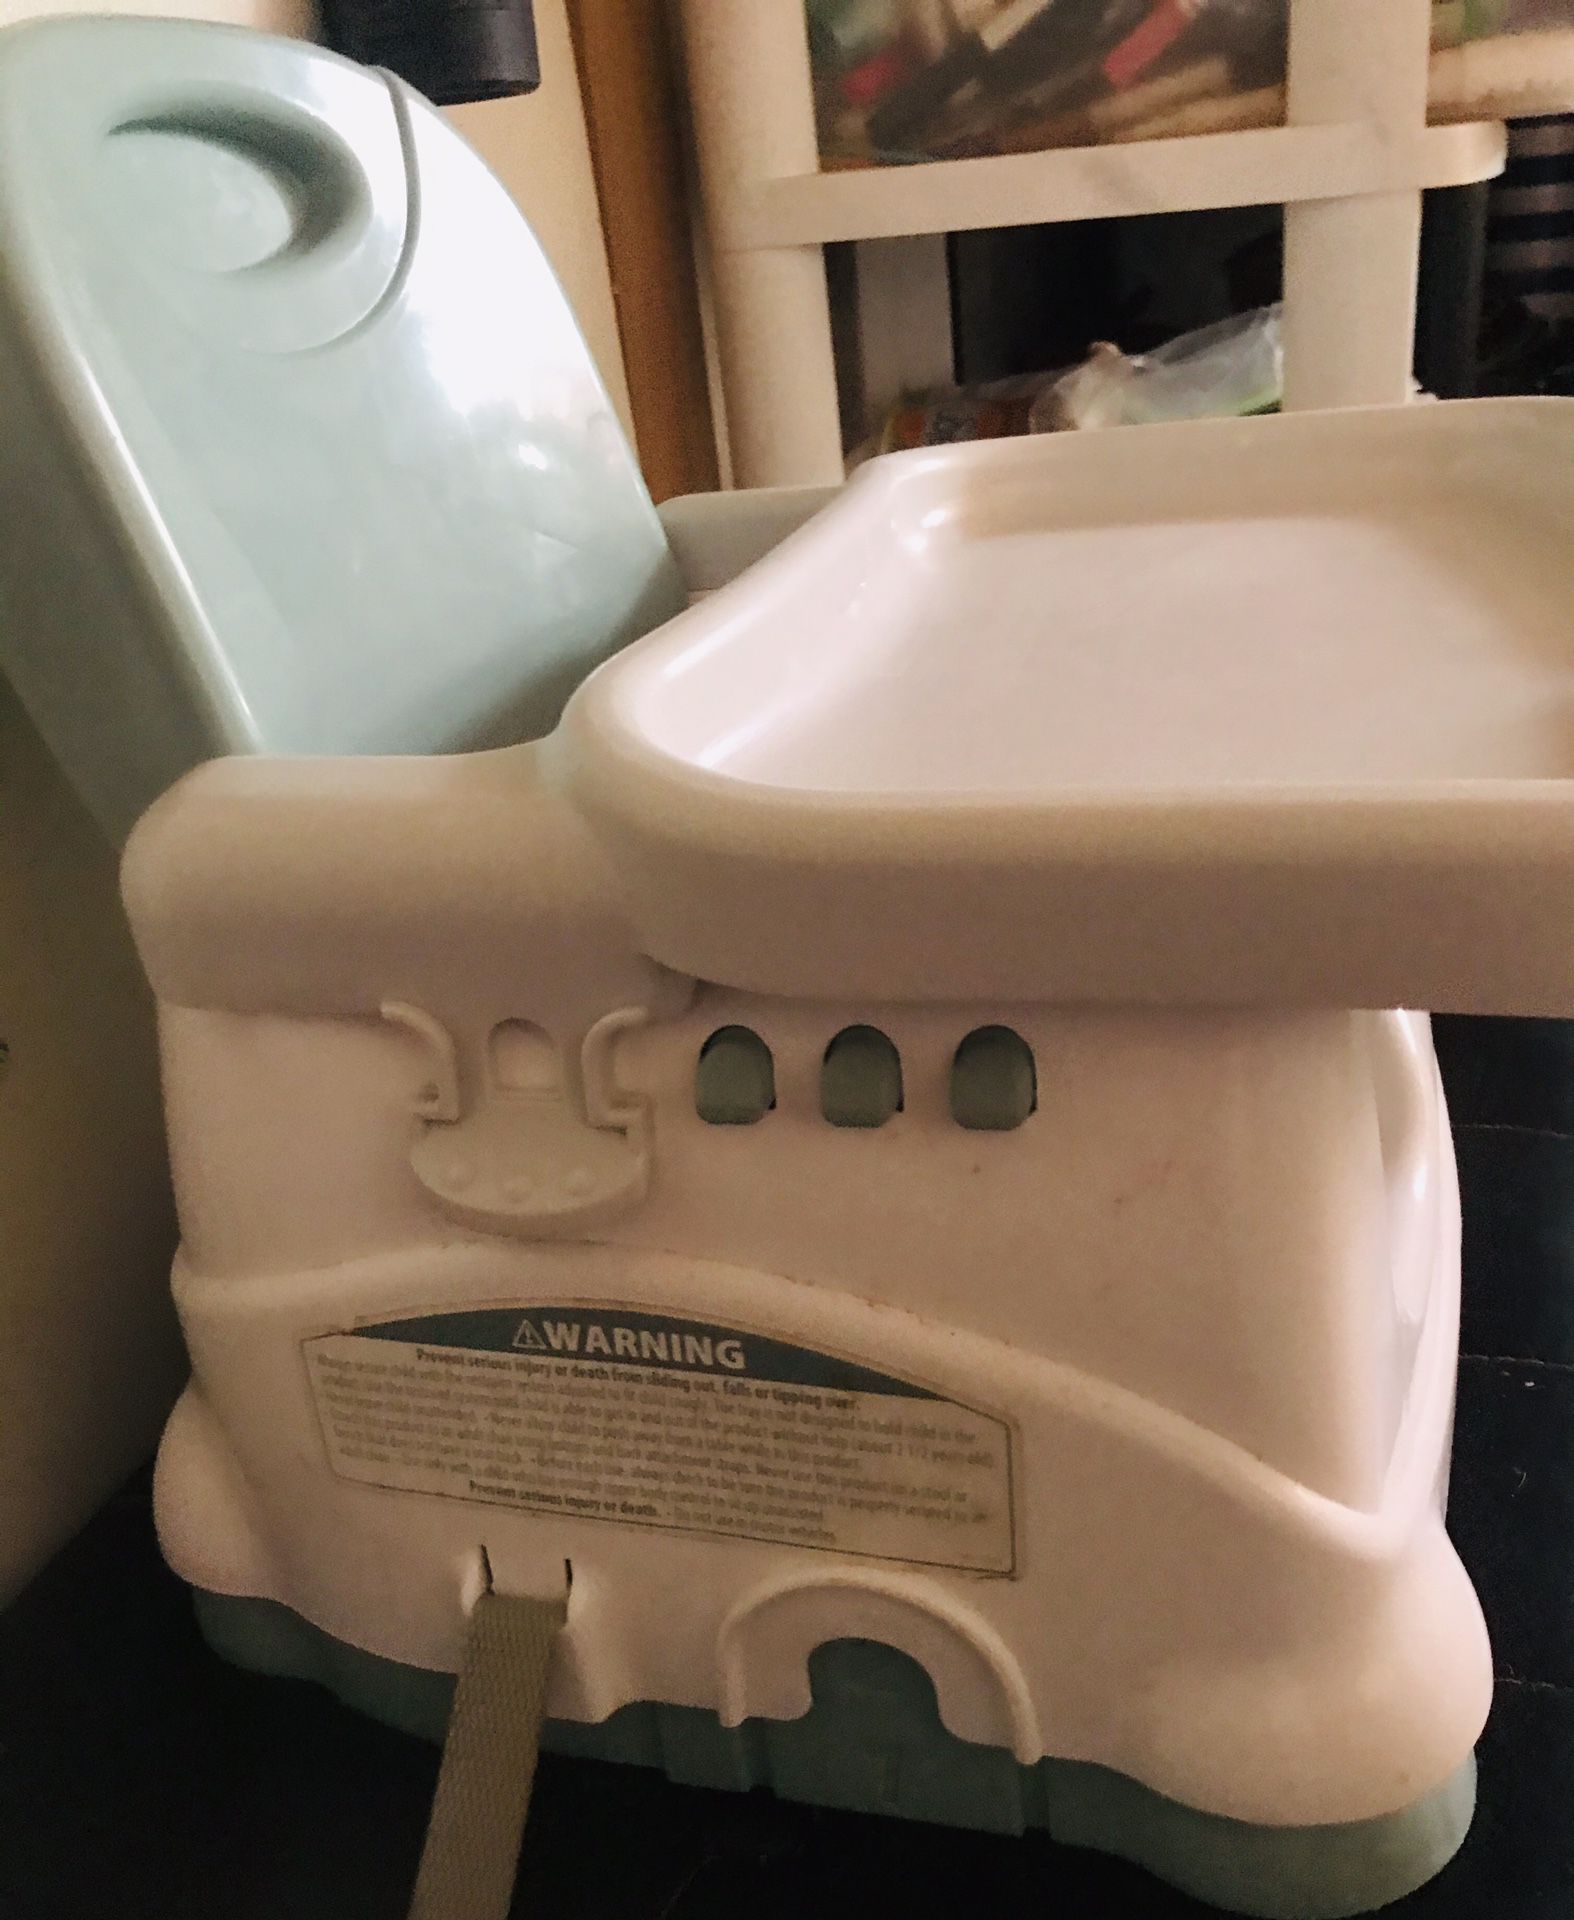 Baby’s feeding chair(very convenient to have, comes with an extra tray)